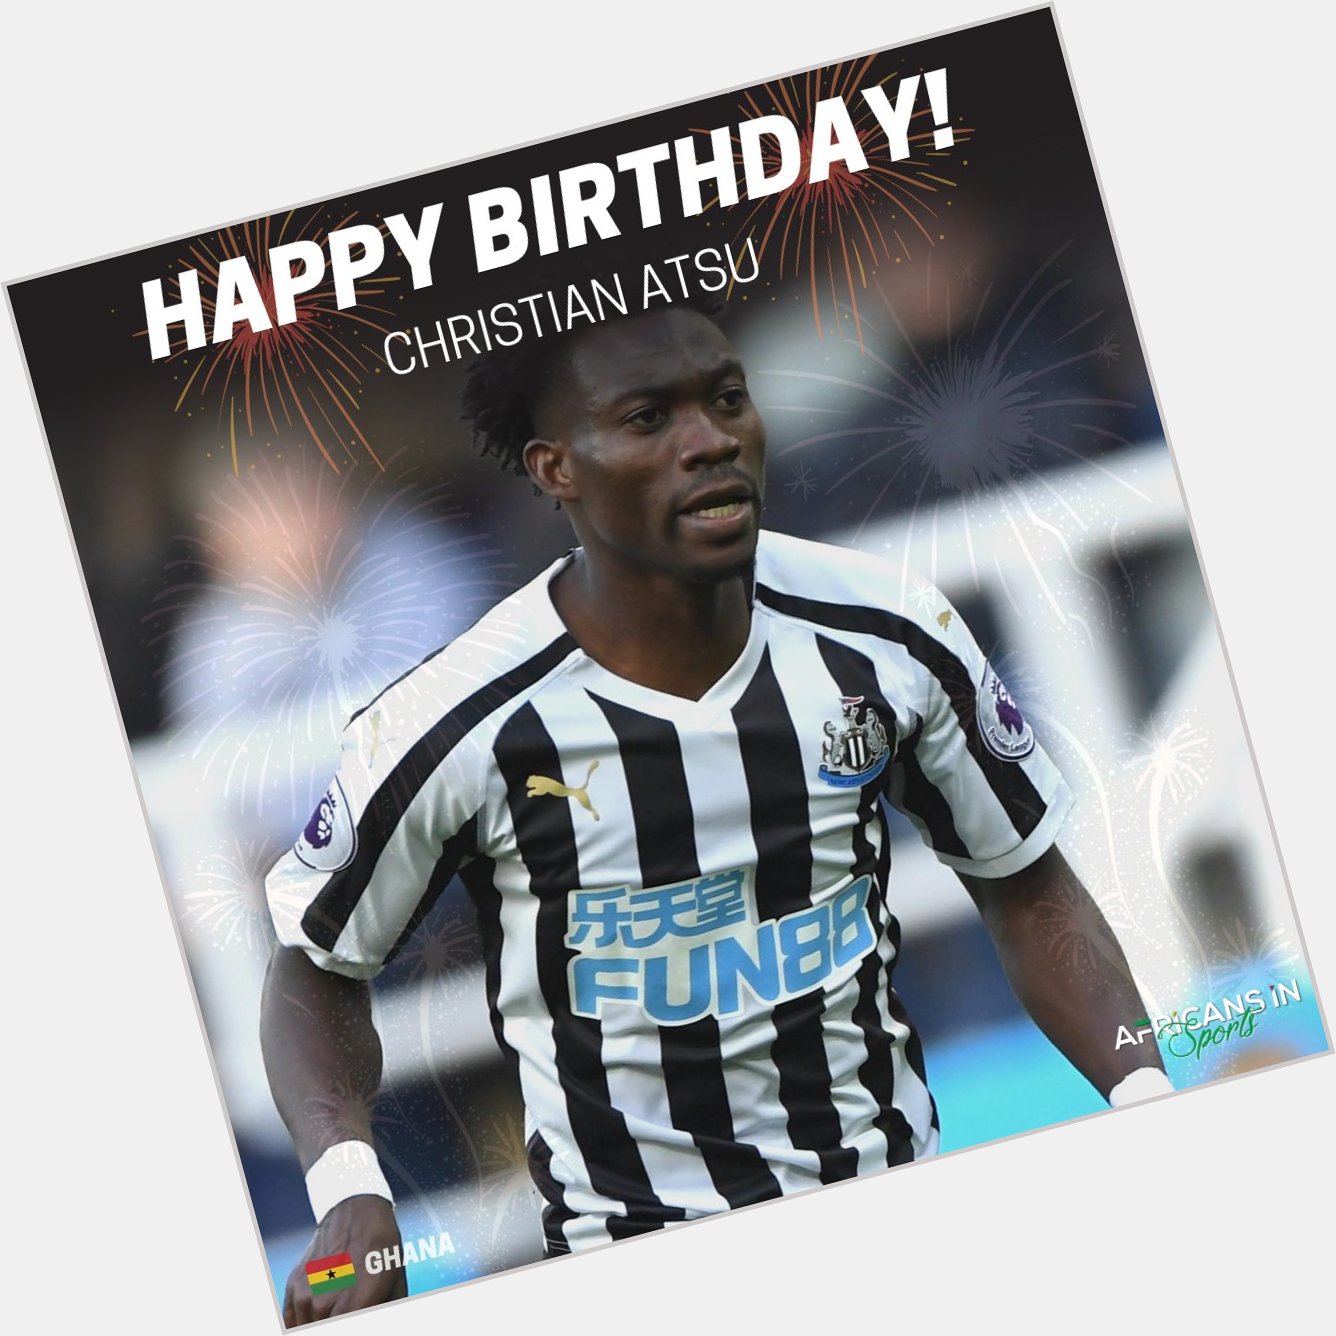 Happy Birthday to Ghanaian Professional Footballer, Christian Atsu  - Send him love via the comment section 